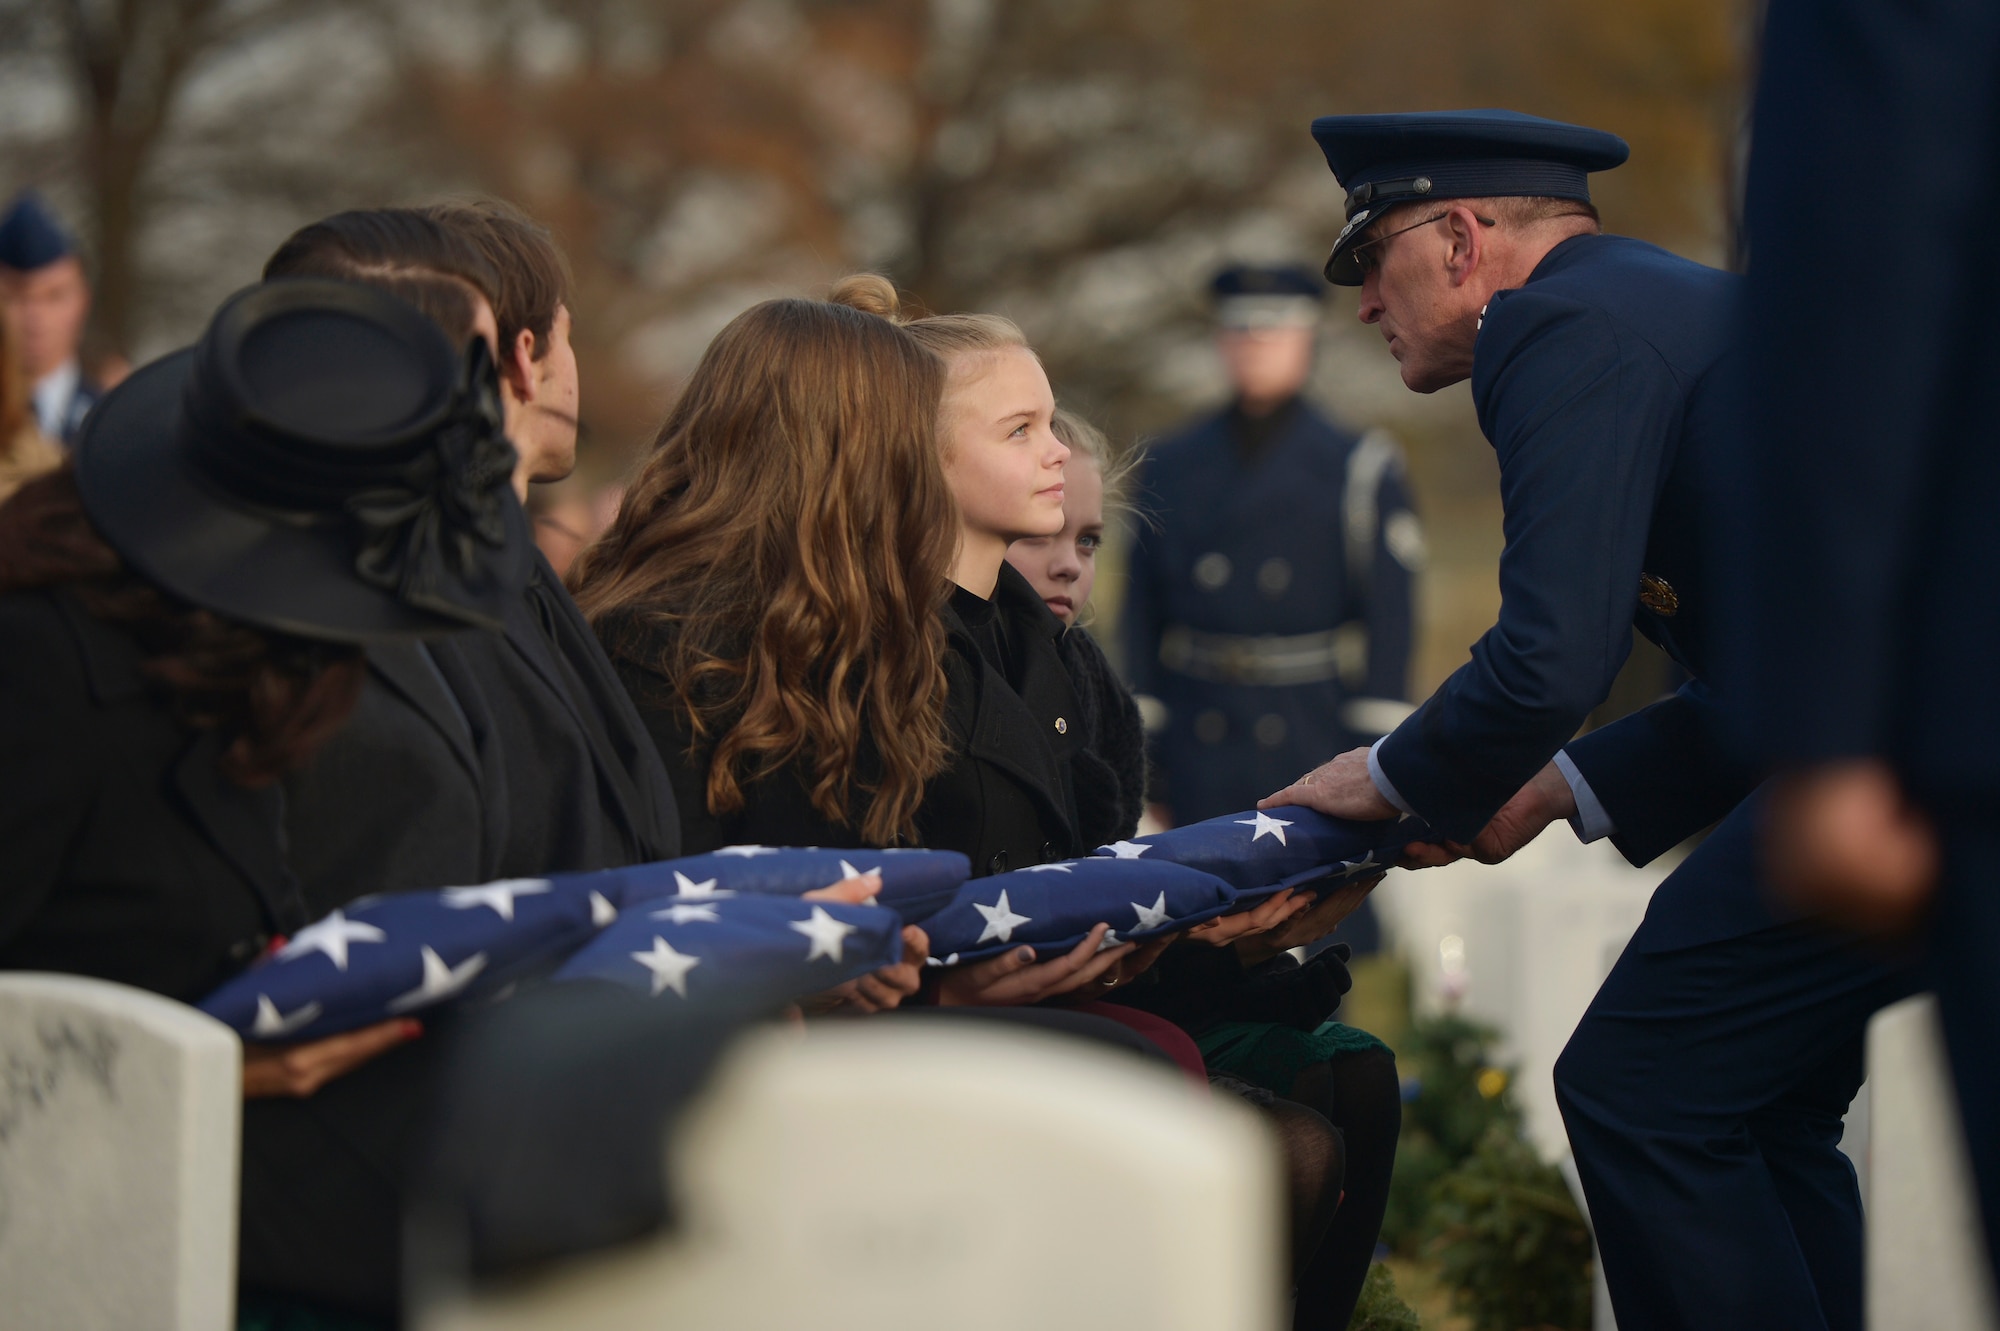 Maj. Gen. Scott Vander Hamm, the Air Force assistant deputy chief of staff of operations, presents a flag to Annalise during the interment for her father, Maj. Troy Gilbert, at Arlington National Cemetery, Va., Dec. 19, 2016.  He is survived by his mother and father, Kaye and retired Senior Master Sgt. Ron Gilbert; sister, Rhonda Jimmerson; wife, Ginger Gilbert Ravella; sons, Boston and Greyson; and daughters, Isabella, Aspen and Annalise. (U.S. Air Force photo/ Tech. Sgt. Joshua DeMotts)